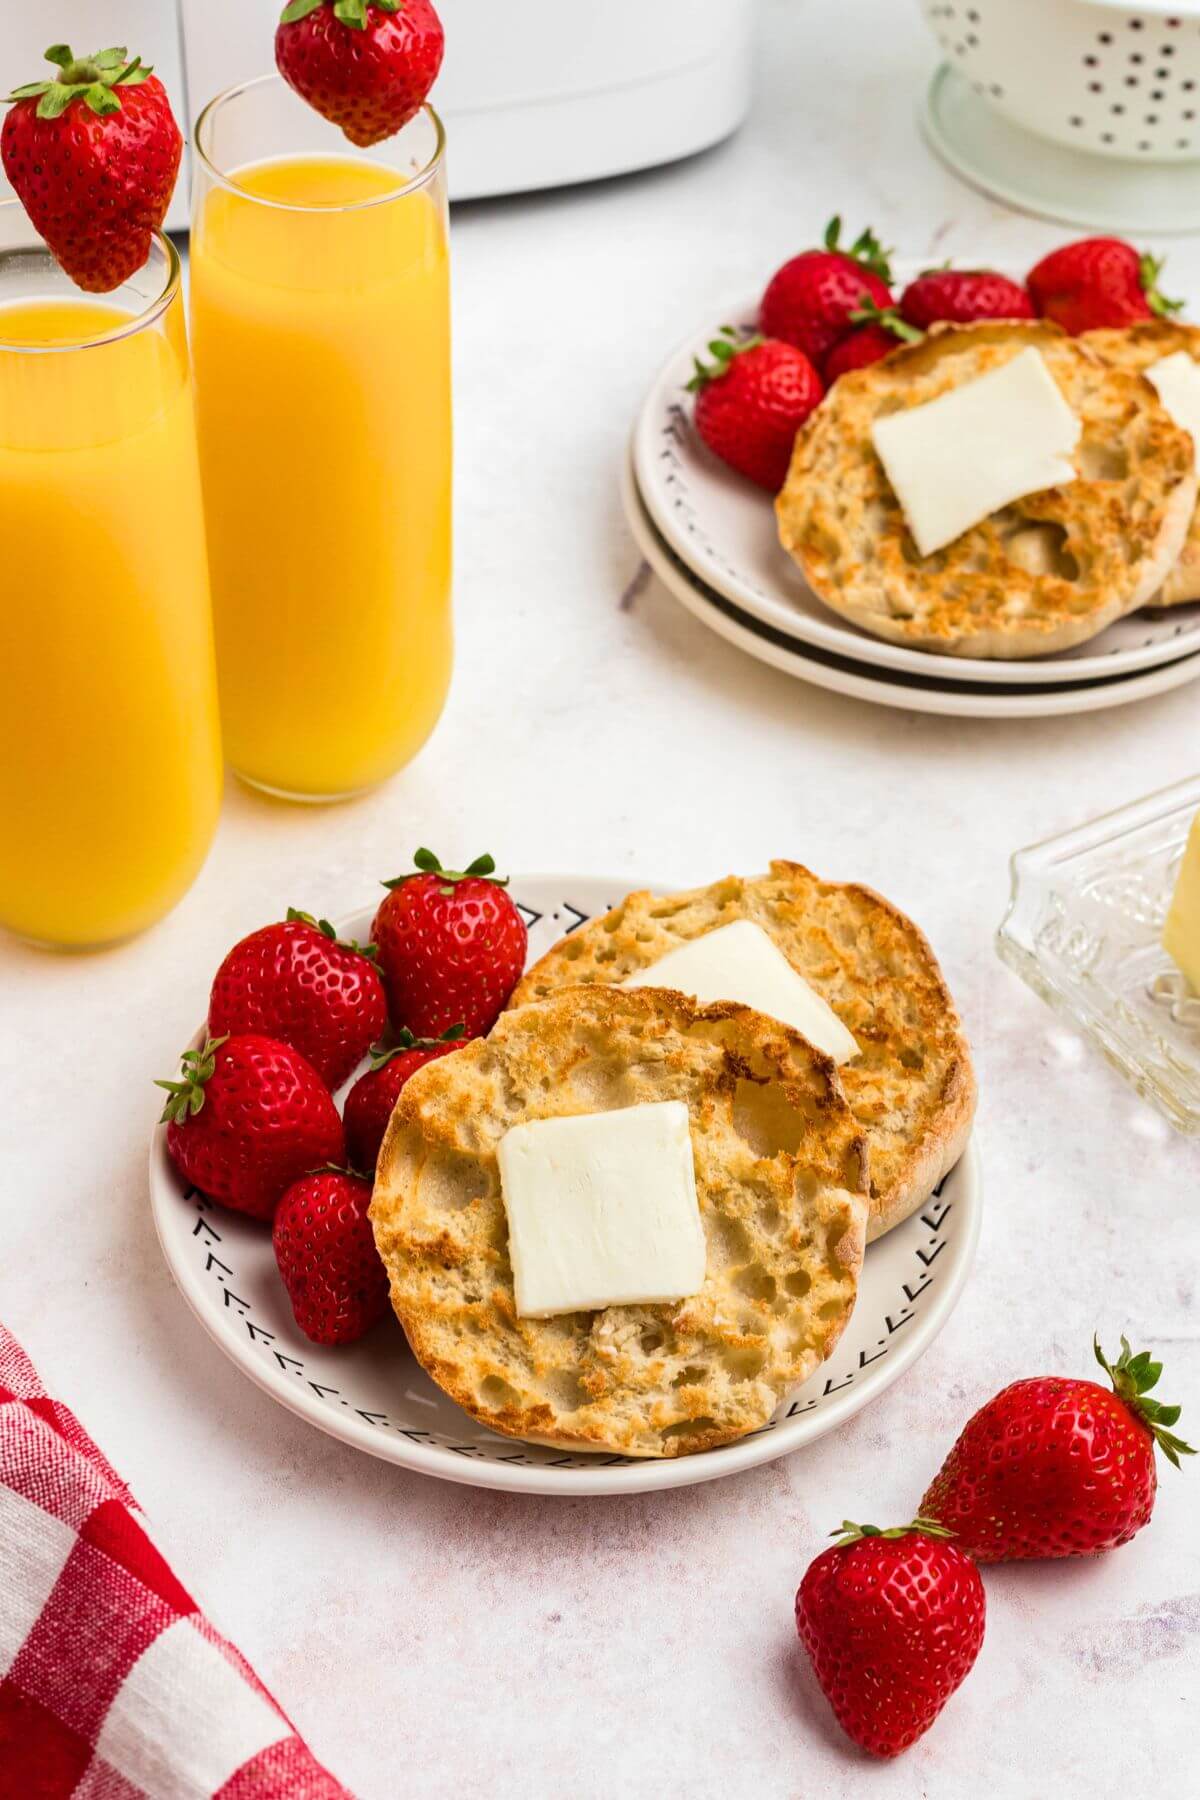 Golden crispy English muffins on a white plate served with strawberries and orange juice. 